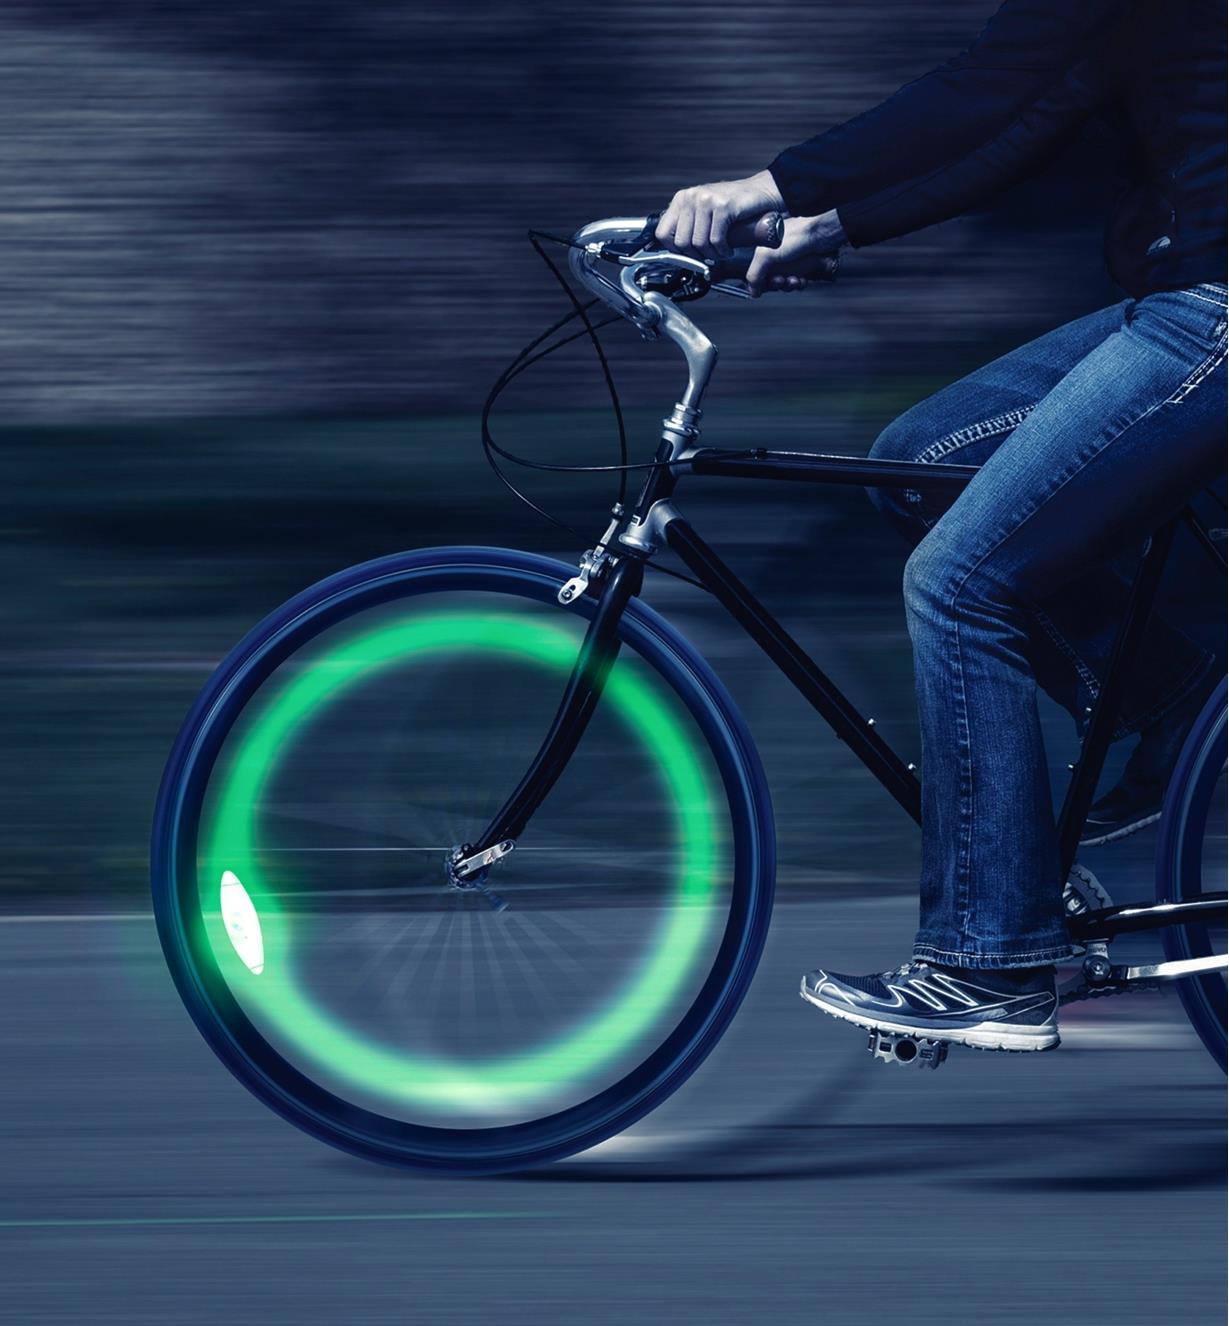 Riding a bicycle at night with a SpokeLit wheel light installed glowing green